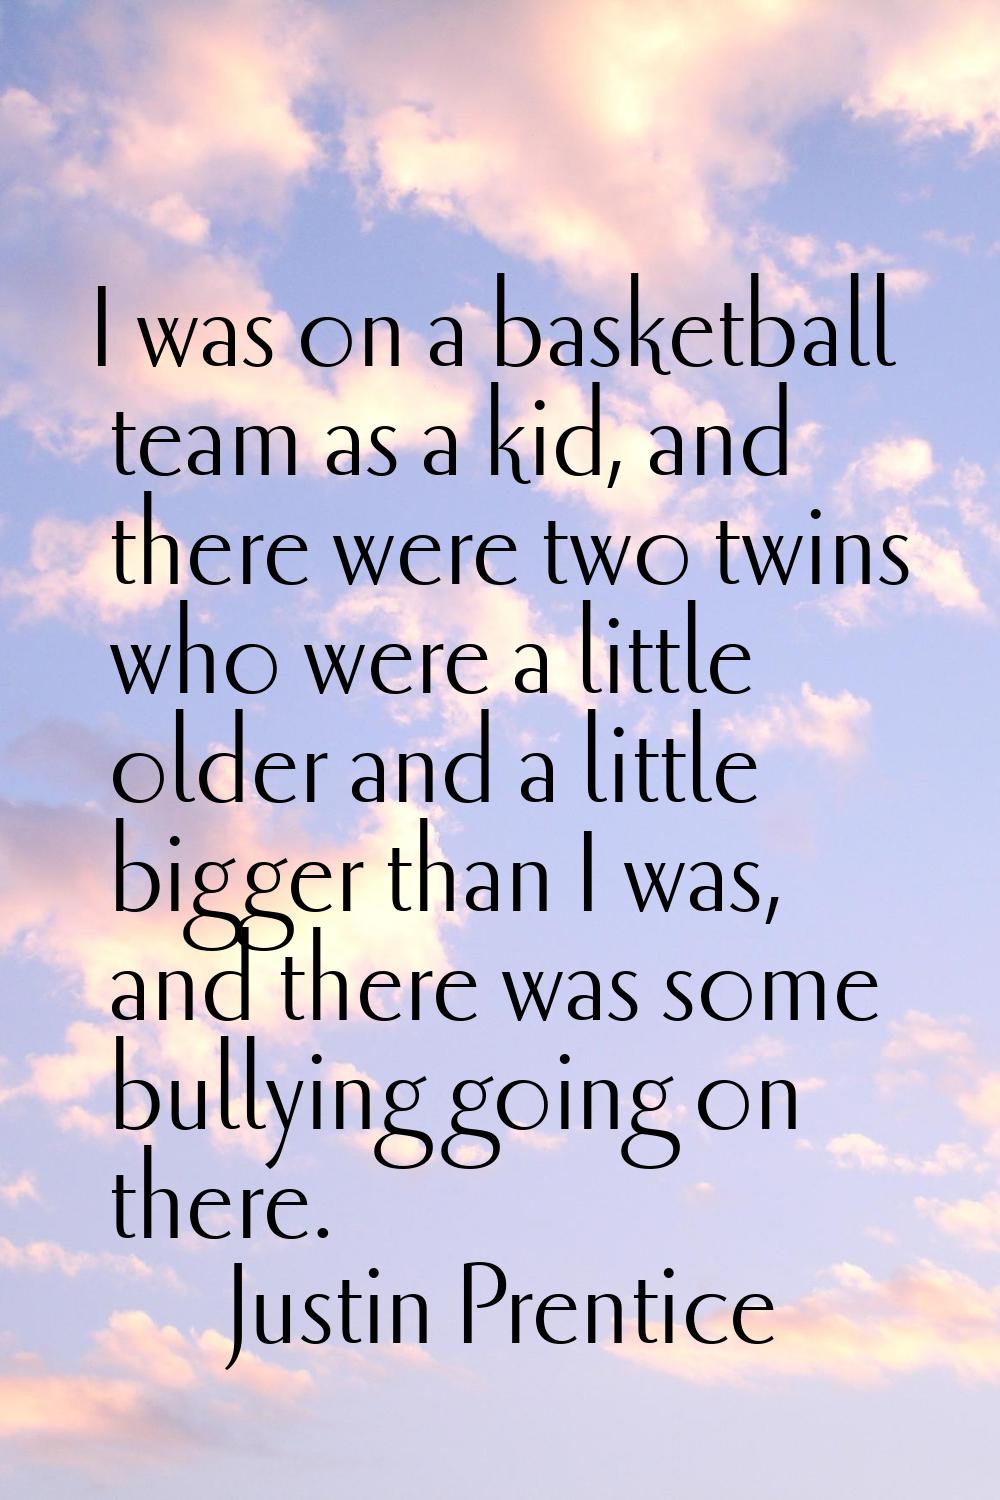 I was on a basketball team as a kid, and there were two twins who were a little older and a little 